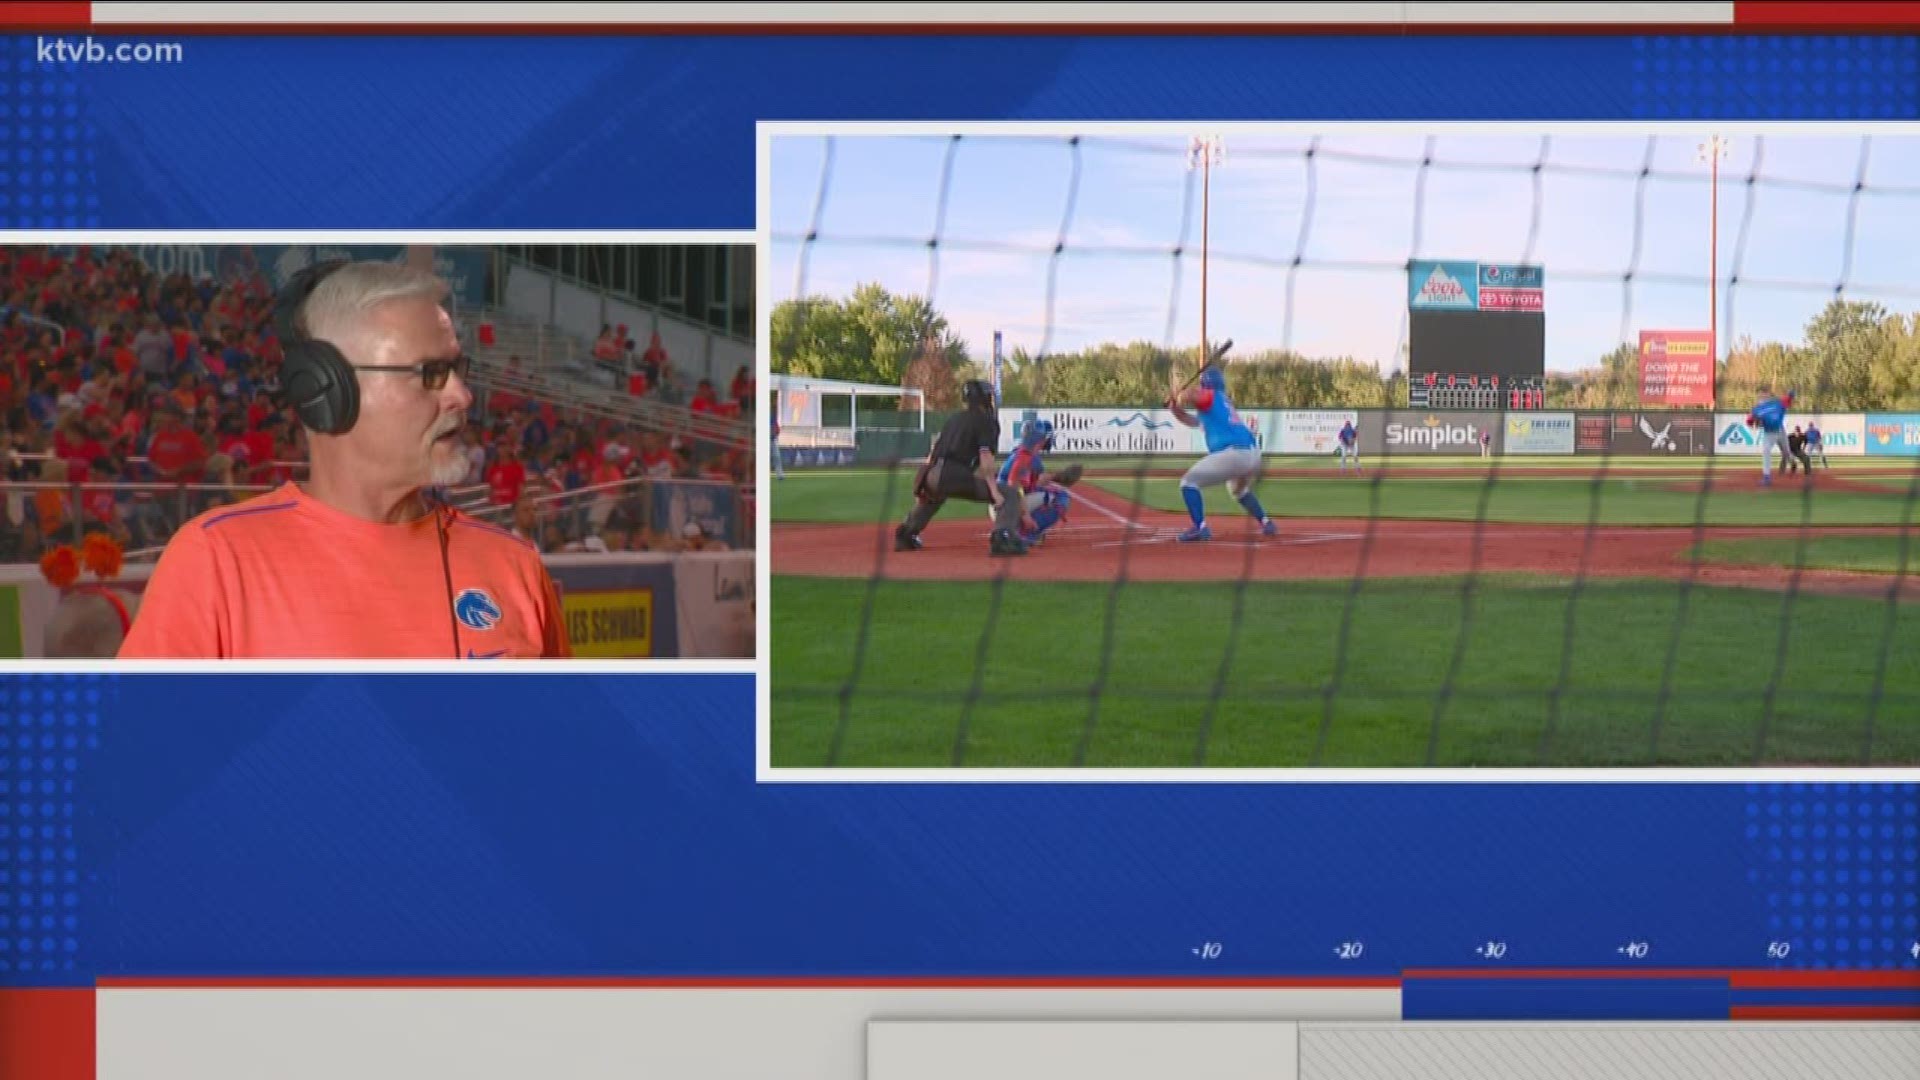 The revived Boise State Baseball program is gearing up for its first season next Spring and coach Gary Van Tol joins the Bronco Roundup Gameday Show to discuss how the team is shaping up.